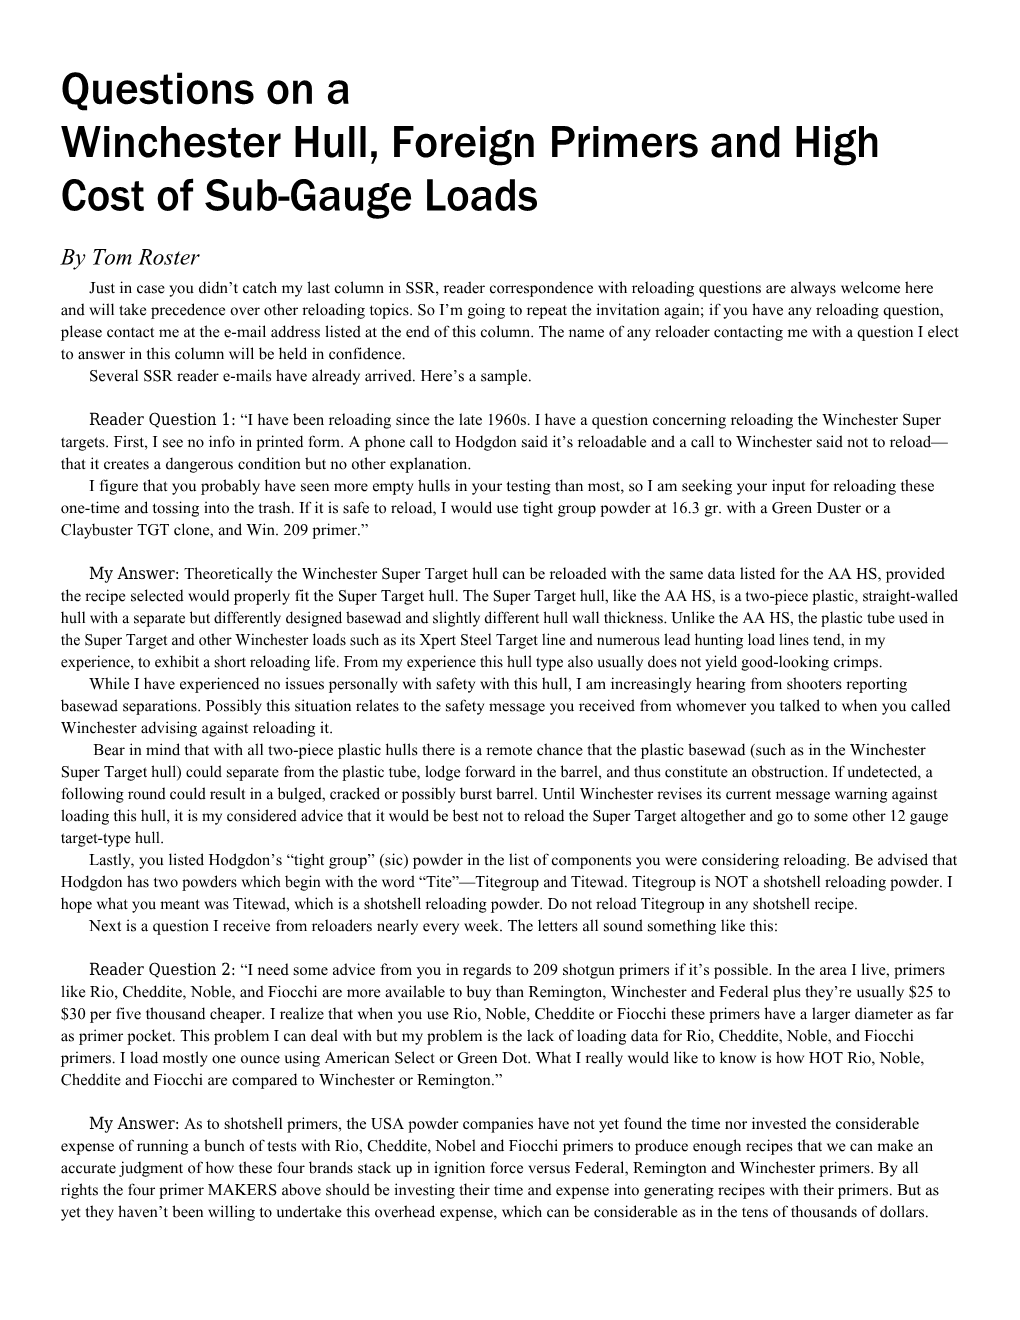 Winchester Hull, Foreign Primers and High Cost of Sub-Gauge Loads